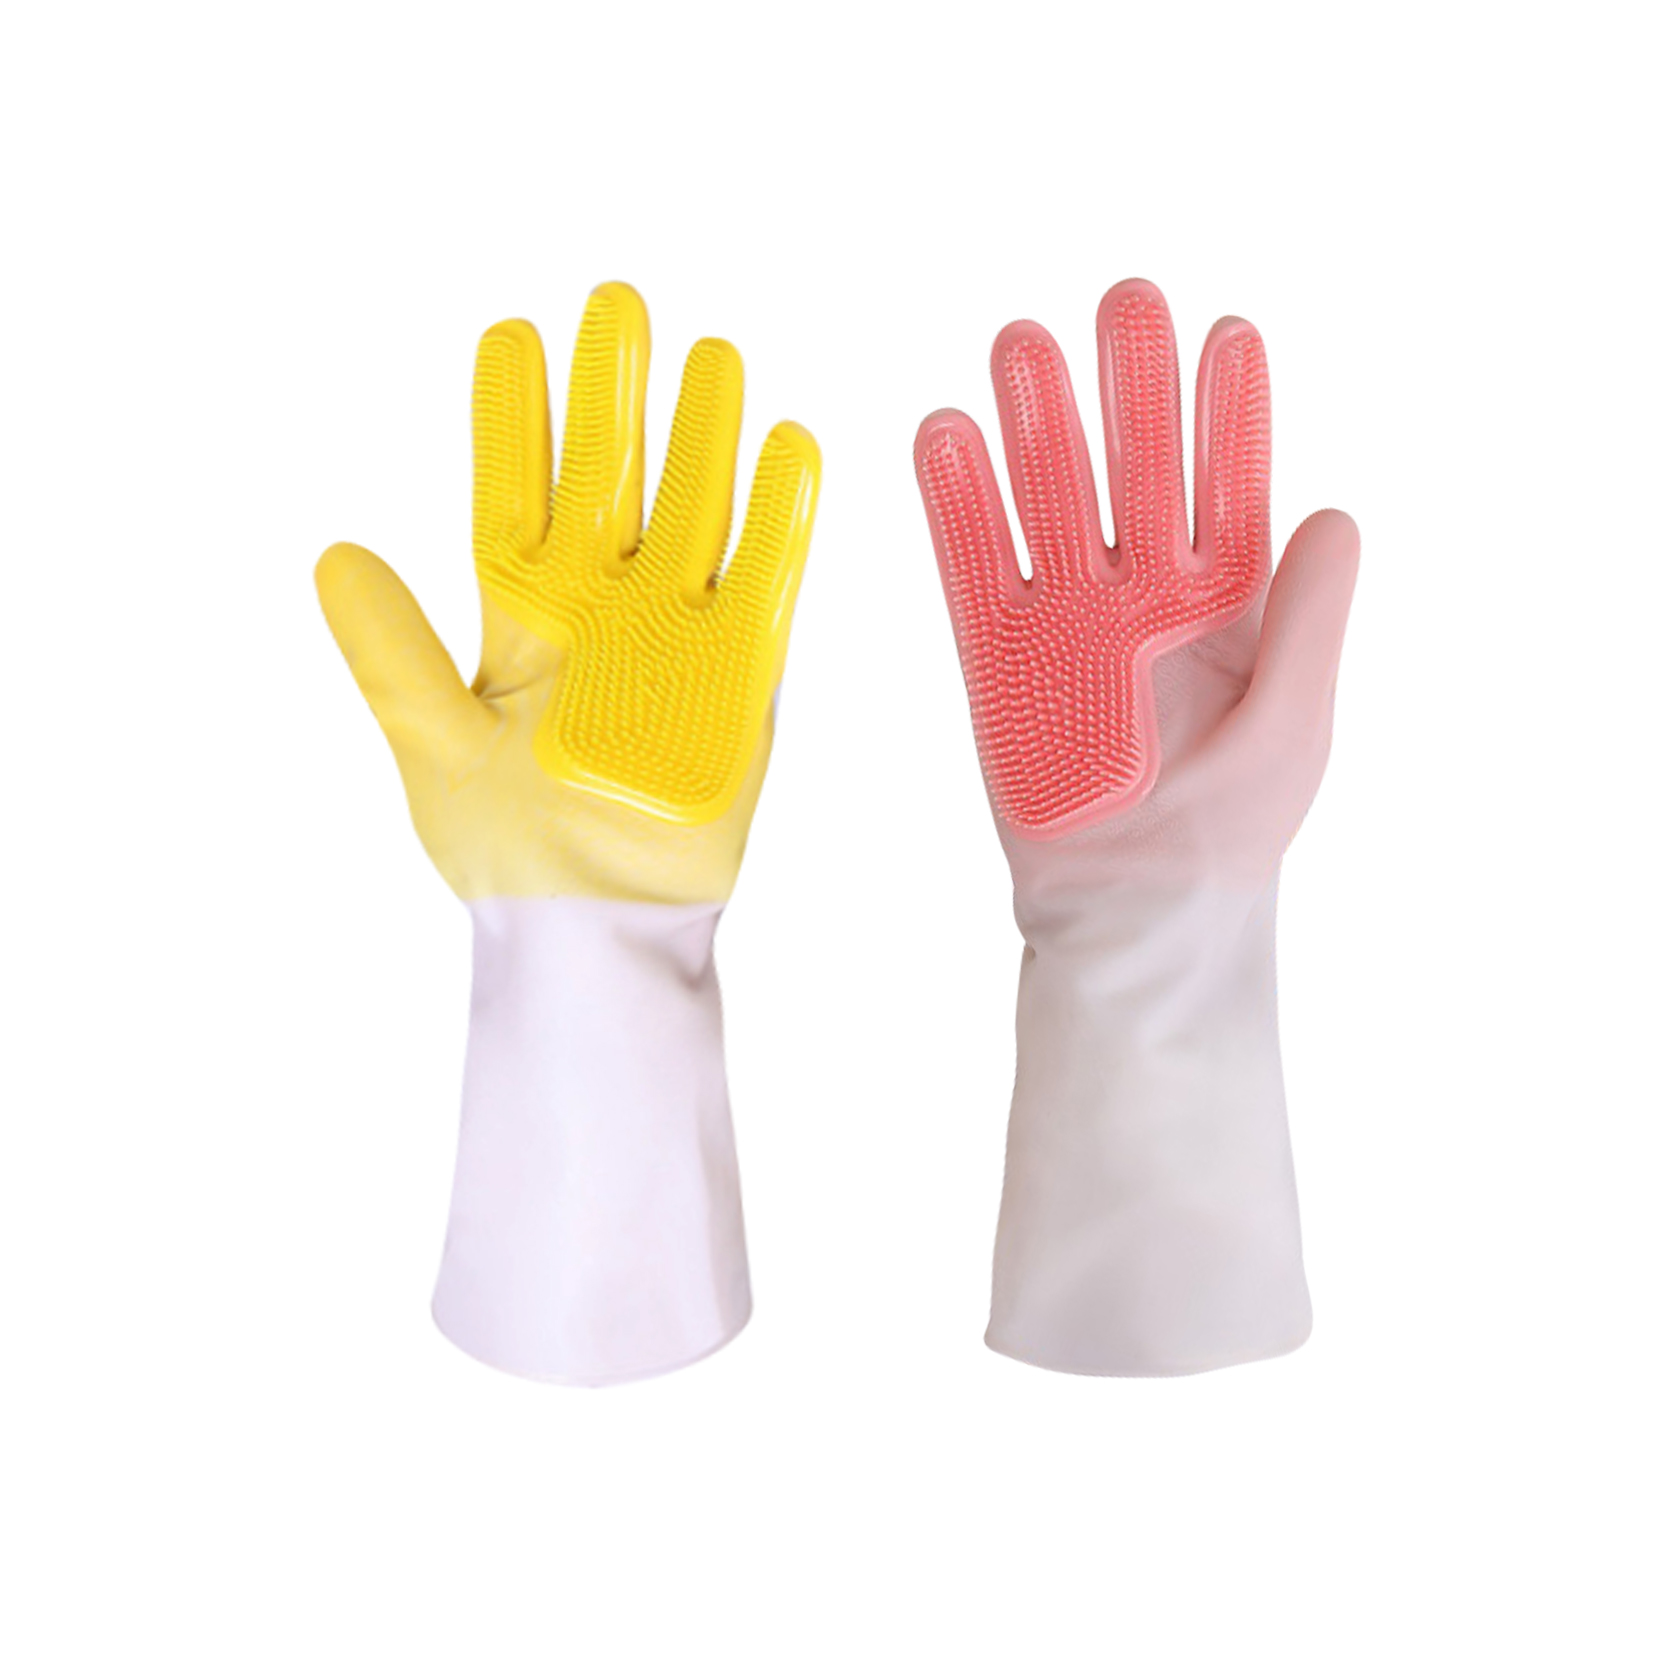 Home Silicone Washing Cleaning Gloves Gardening Kitchen Dish Food Grade Household Cleaning Dishwashing Gloves